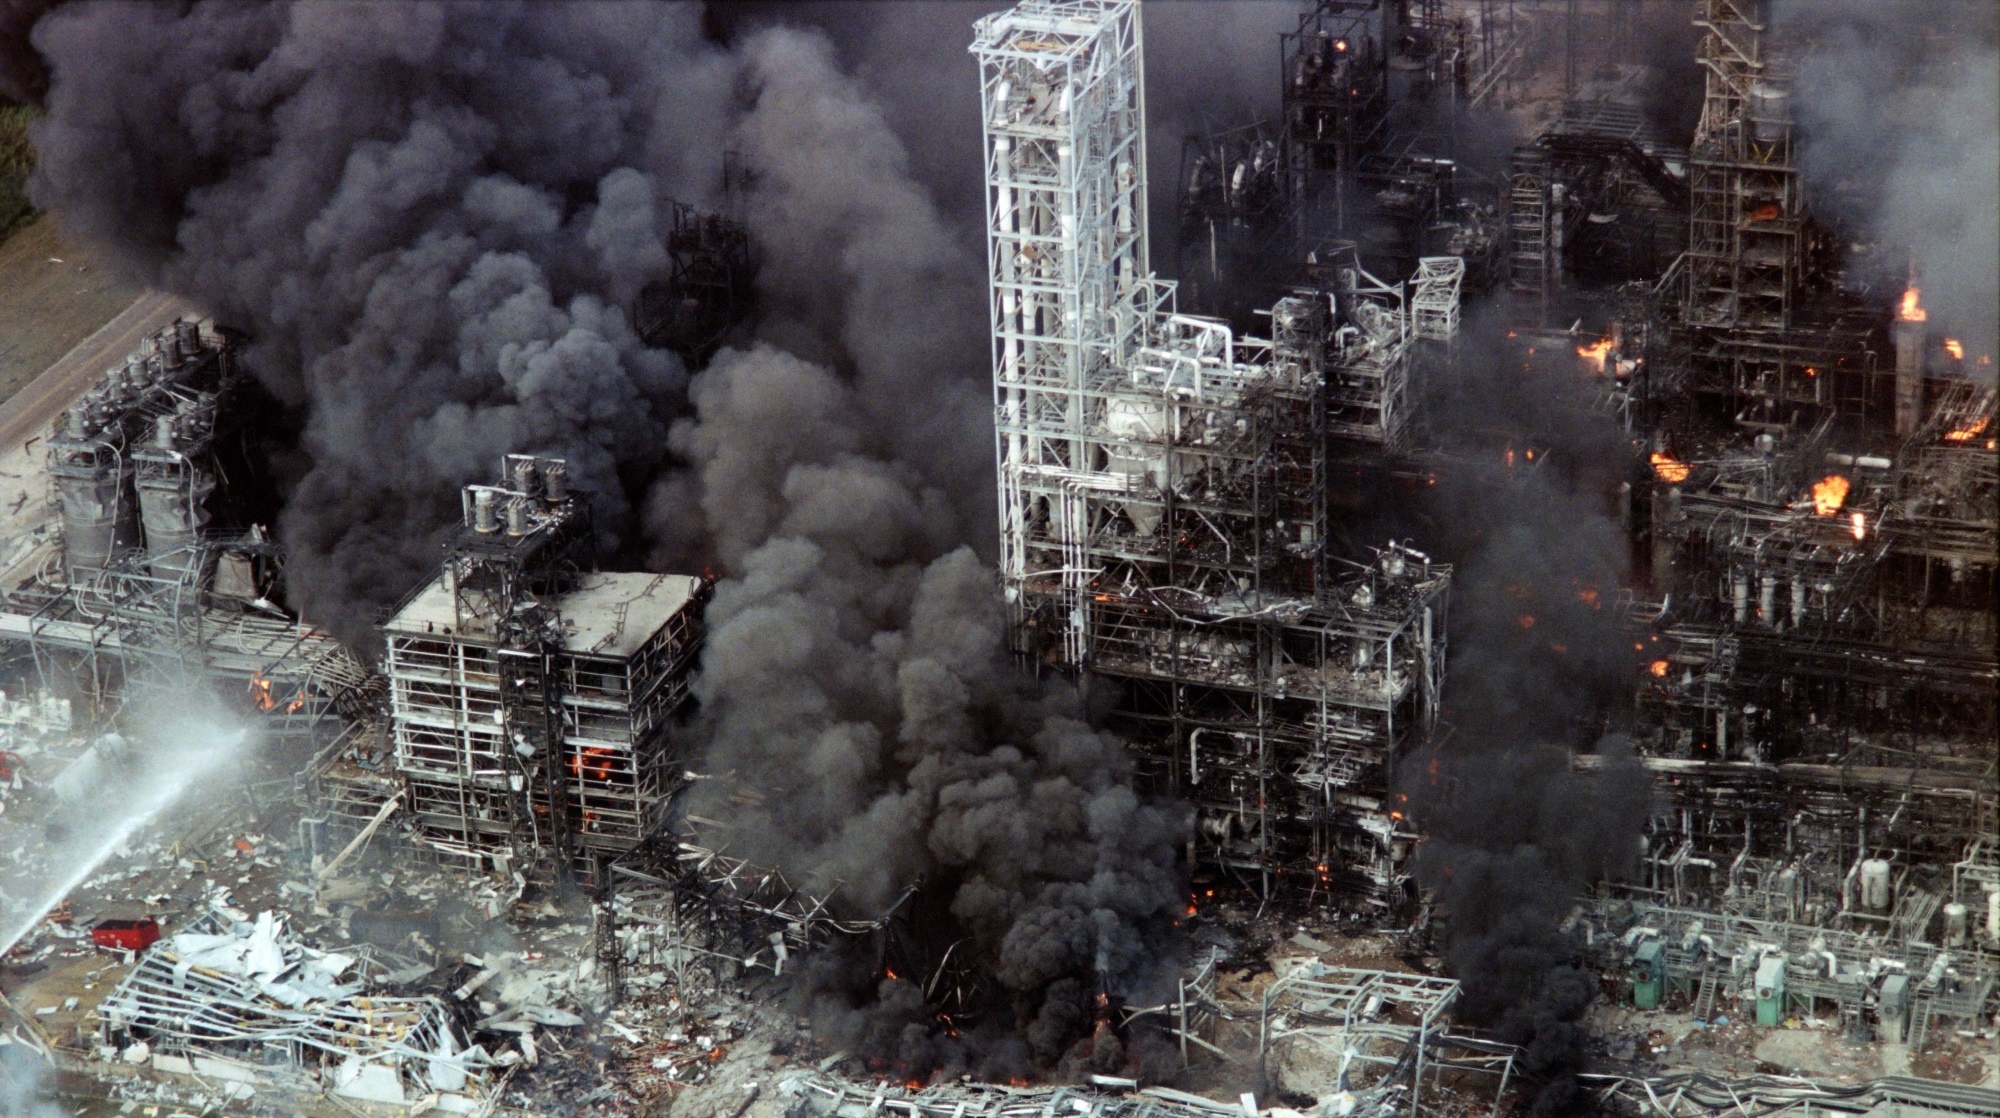 Texas factory gas leak disaster 23 people died after multiple explosions in 1989